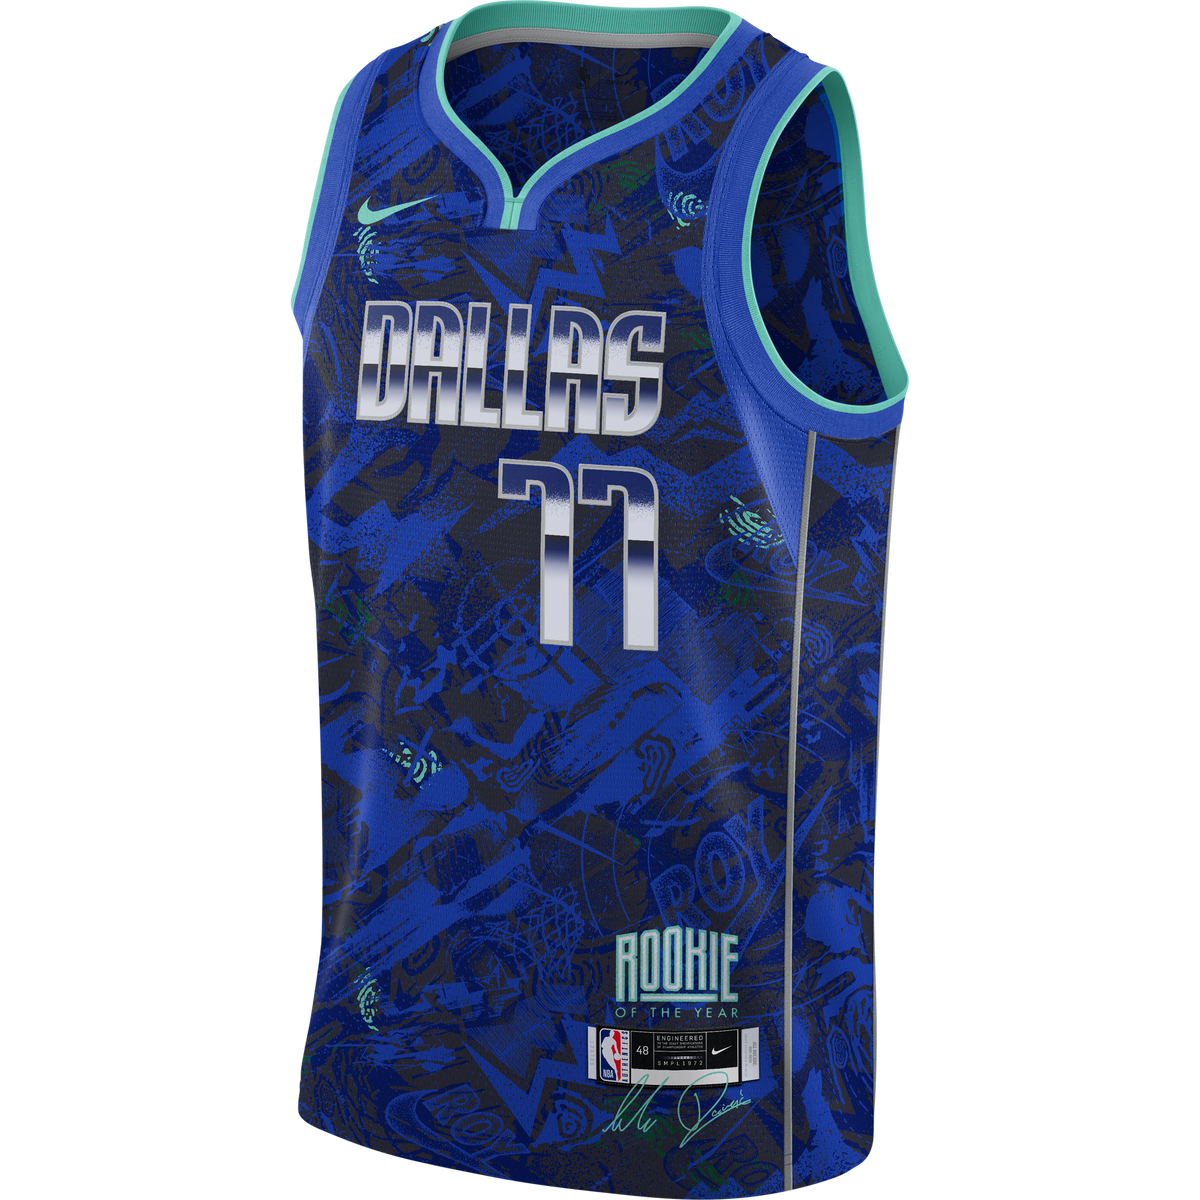 mvp rookie of the year jersey